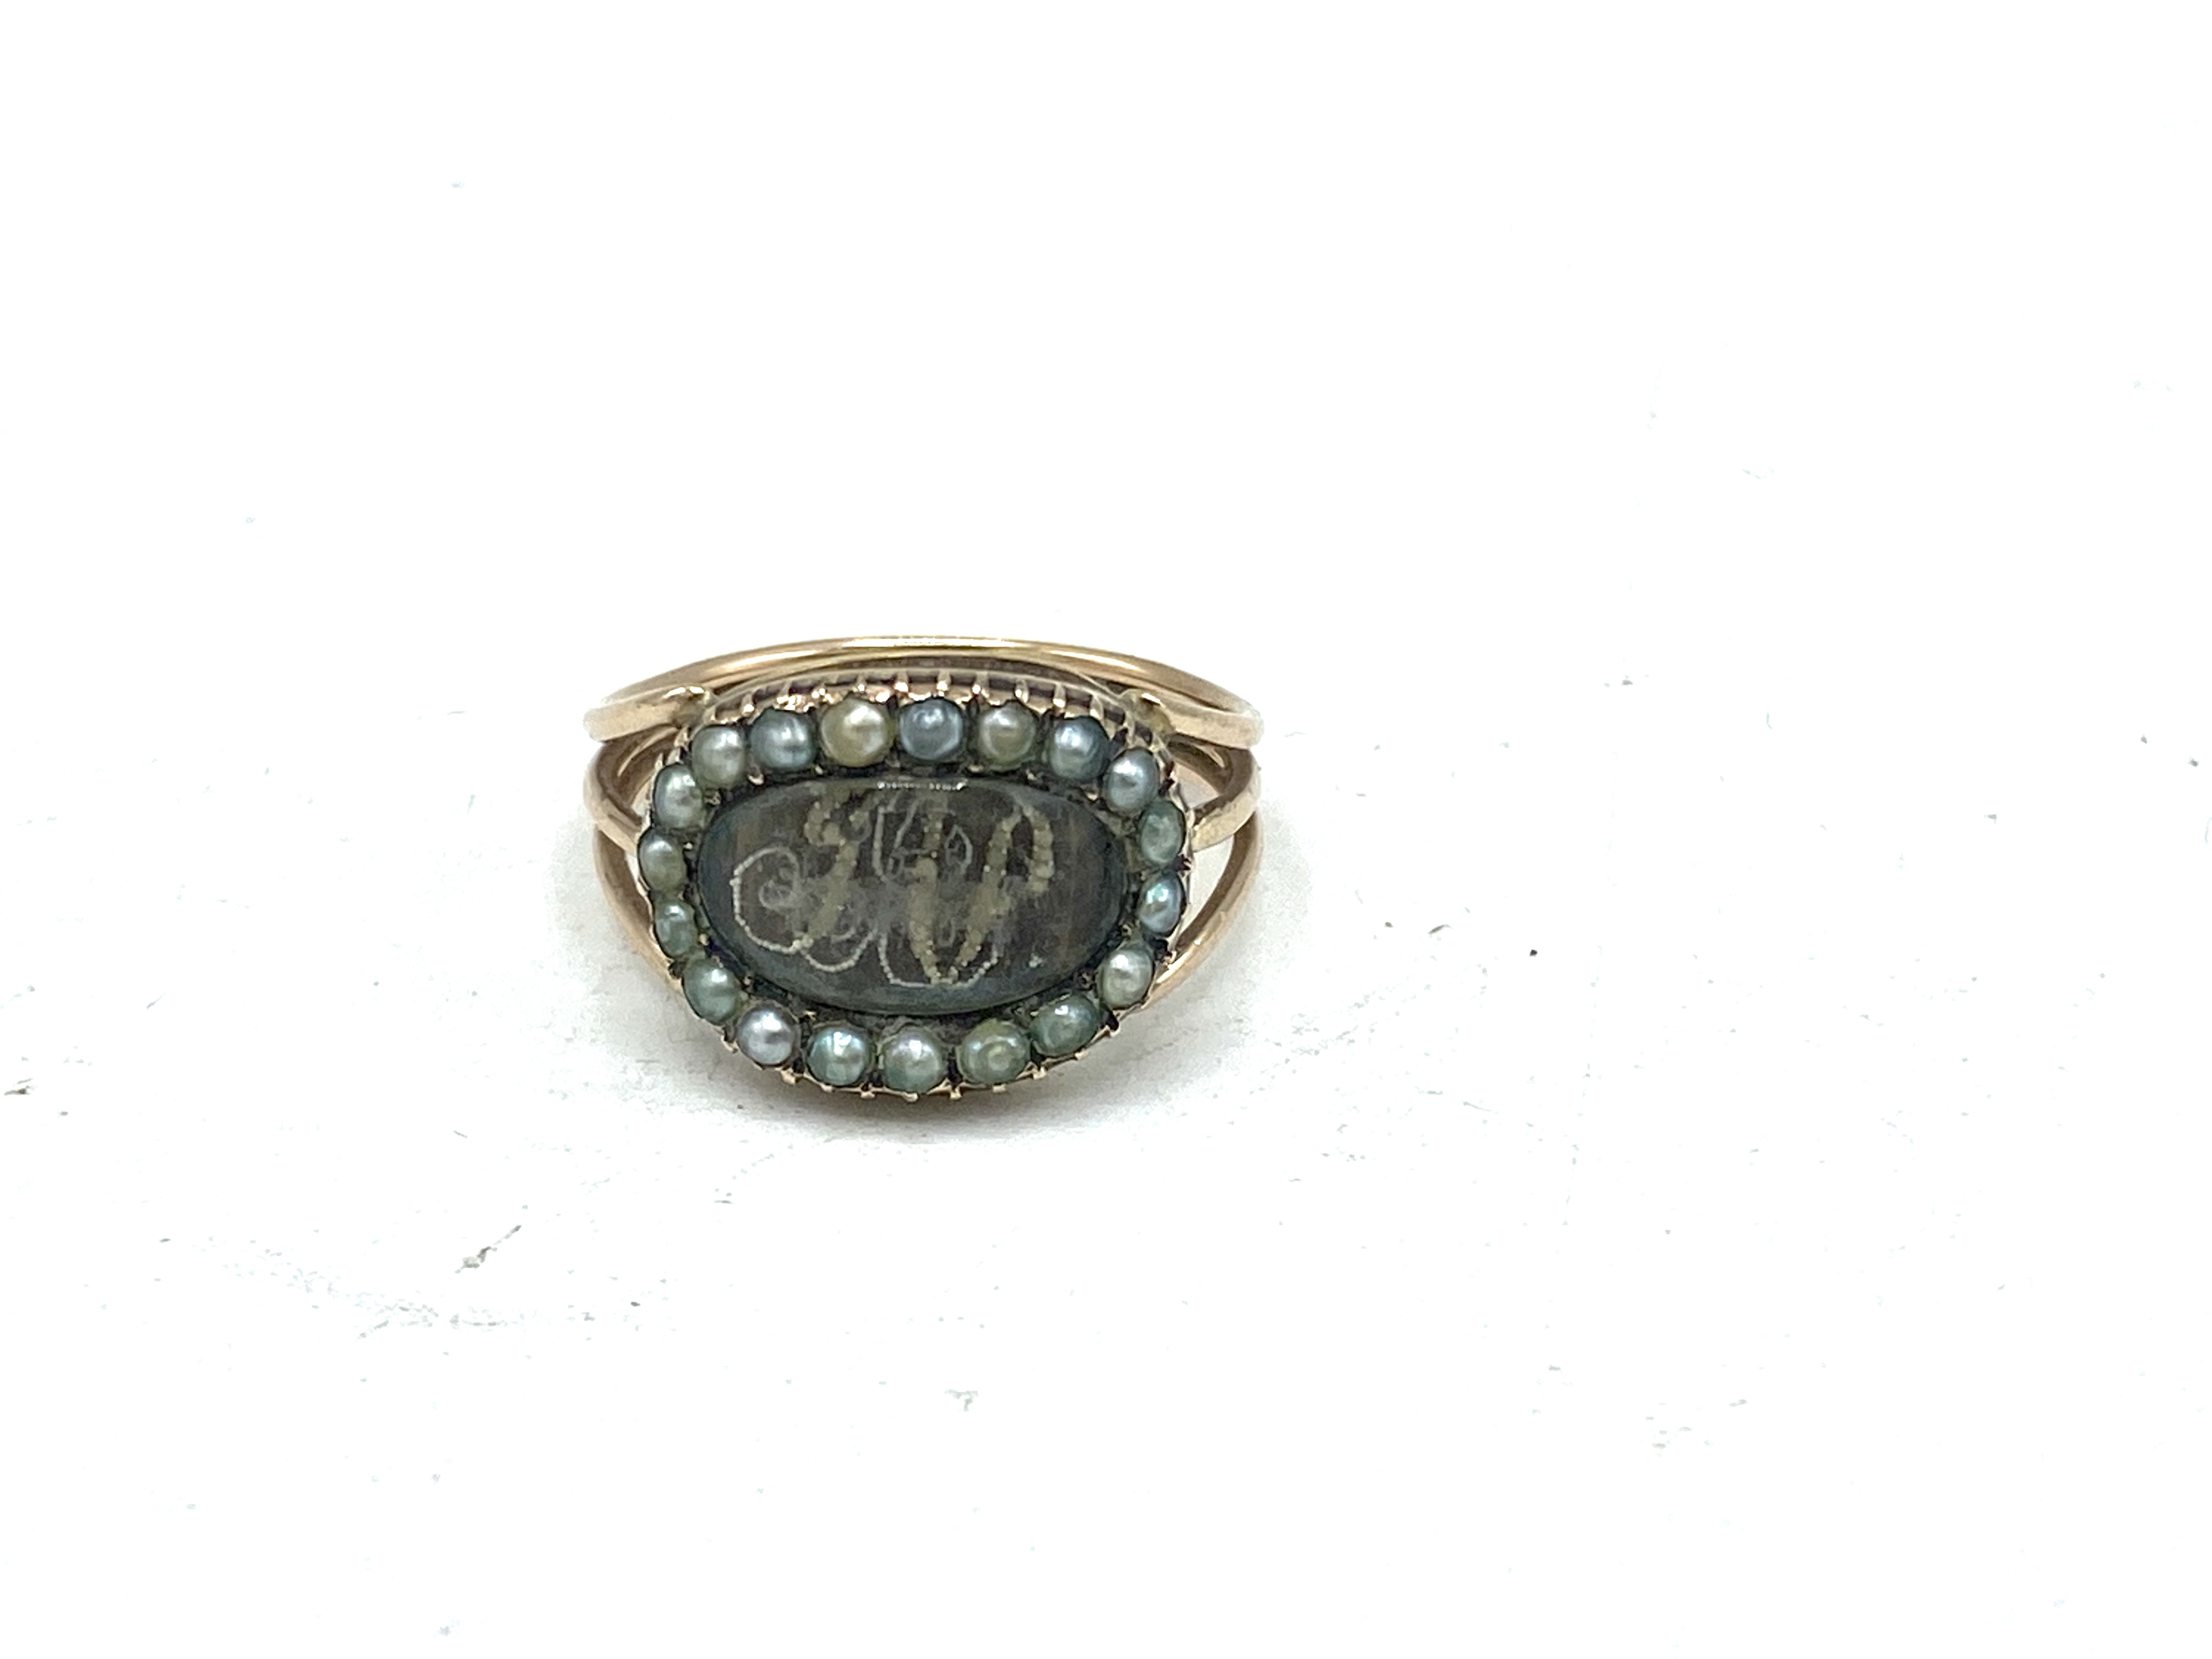 19th century emerald and pearl ring - Image 4 of 8